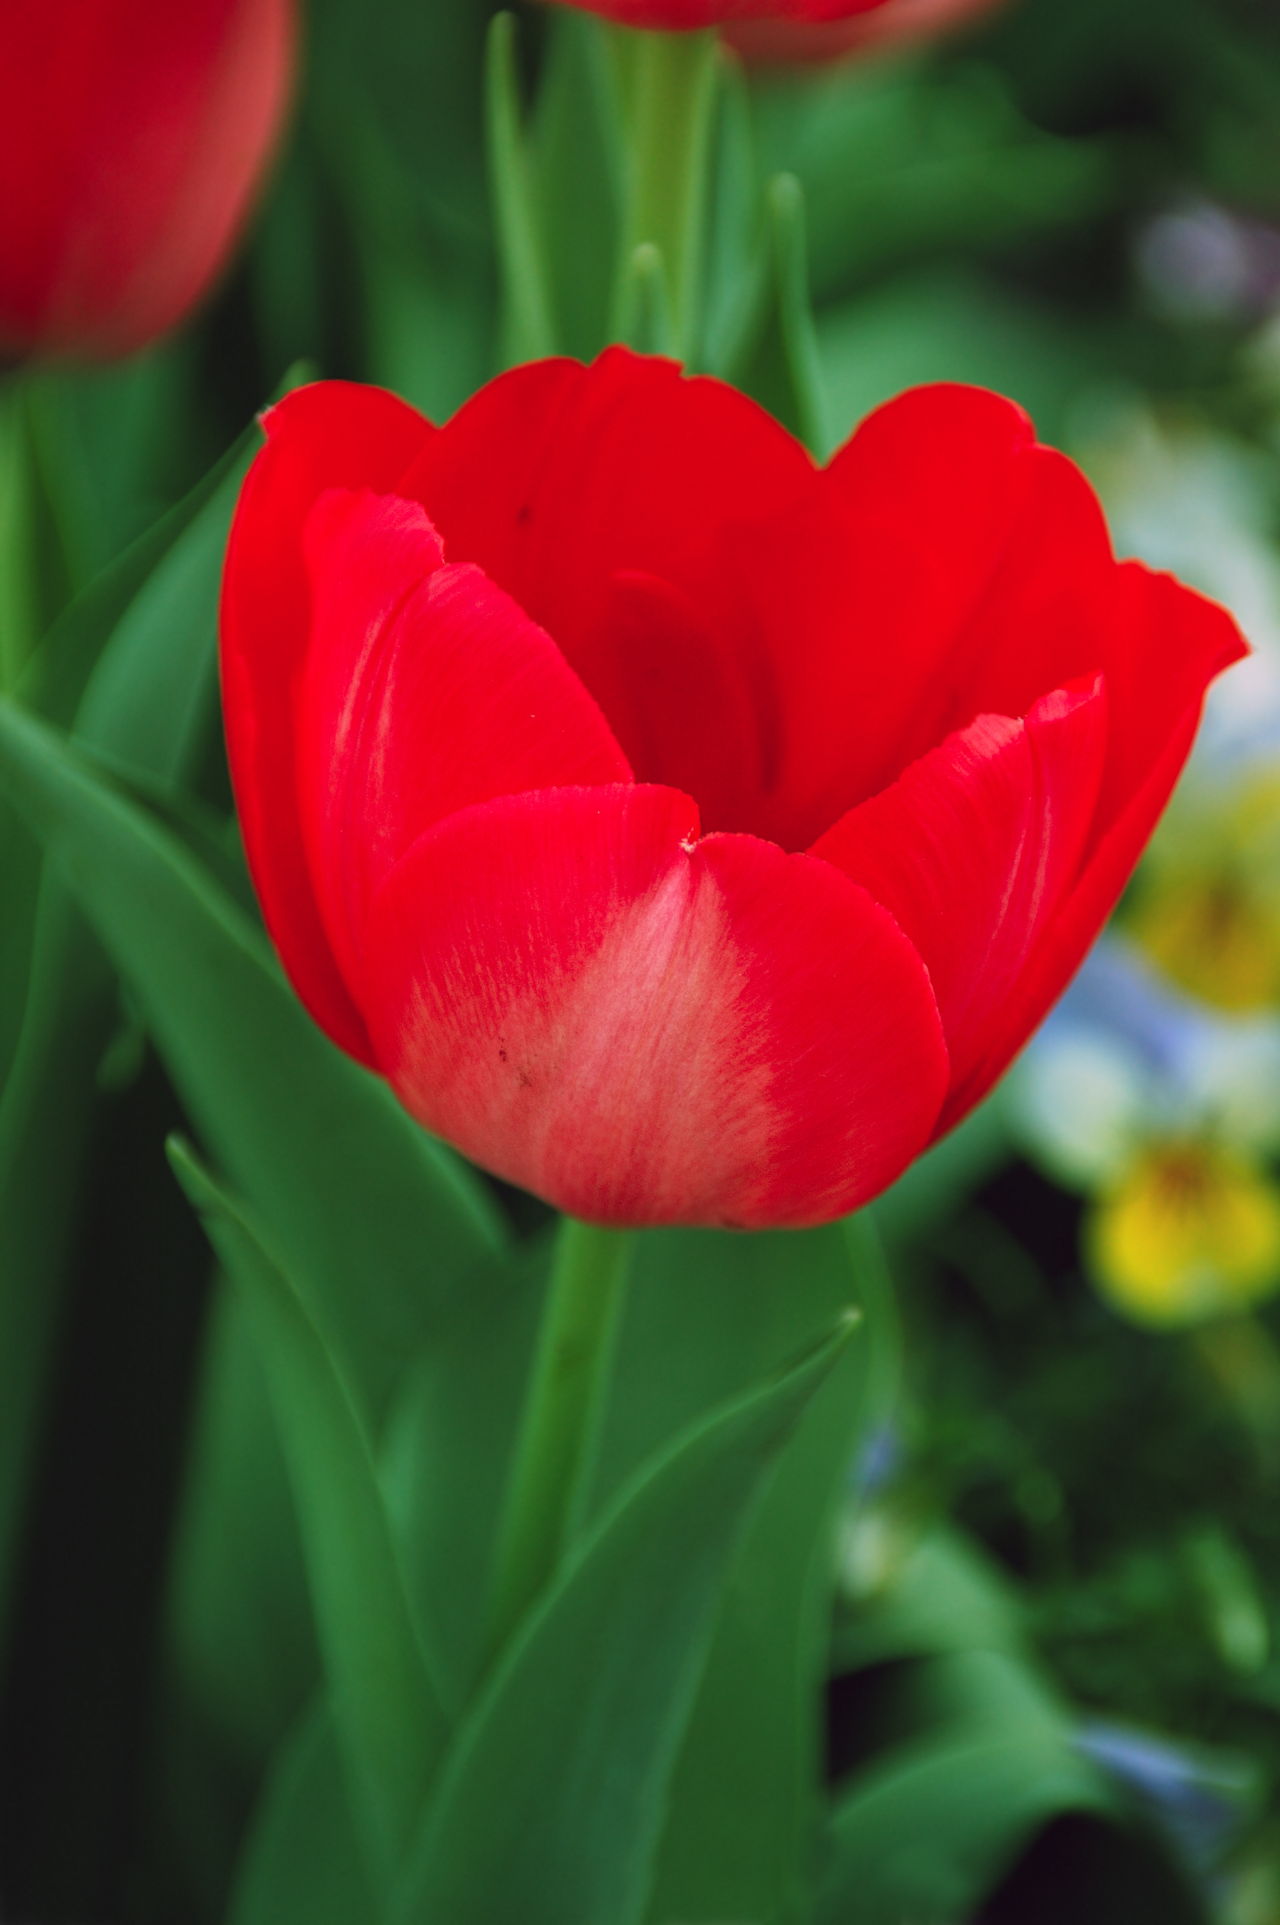 You'll Be Fascinated to Know the Real Meaning of Red Tulips